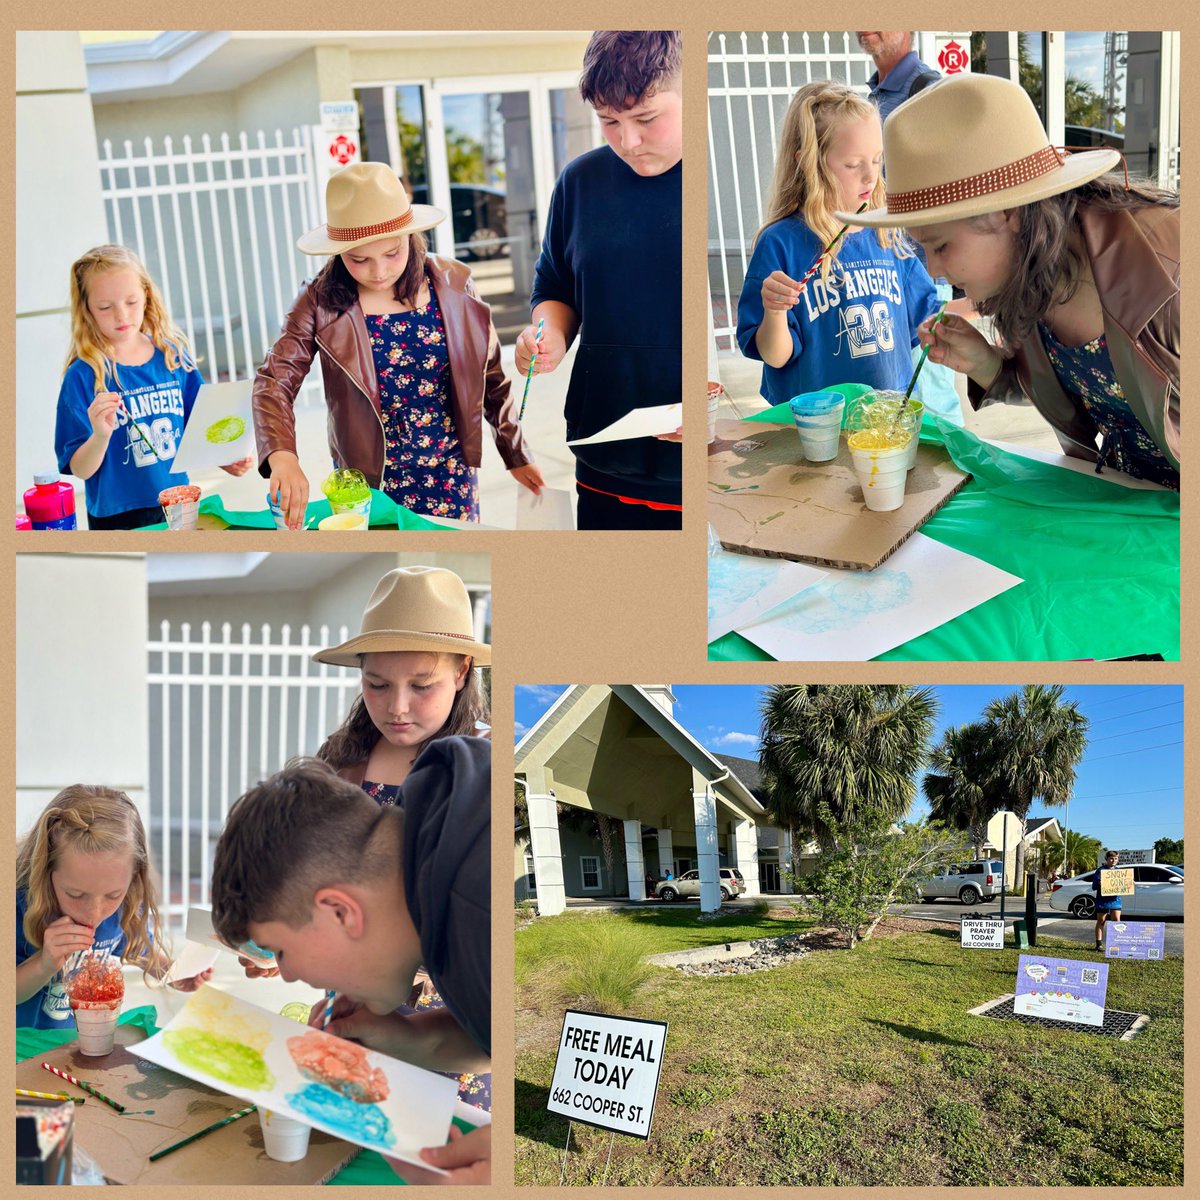 The Burgers & Bubbles Fun event at Punta Gorda’s Church of God of Prophecy was fun for parents and kids alike! Cars lined up for the free food, while kids made bubble art & got snow-cones & bracelets. @remakelearning @RemakeDays @ThePattersonFdn #remakedays #SuncoastRemakeDays